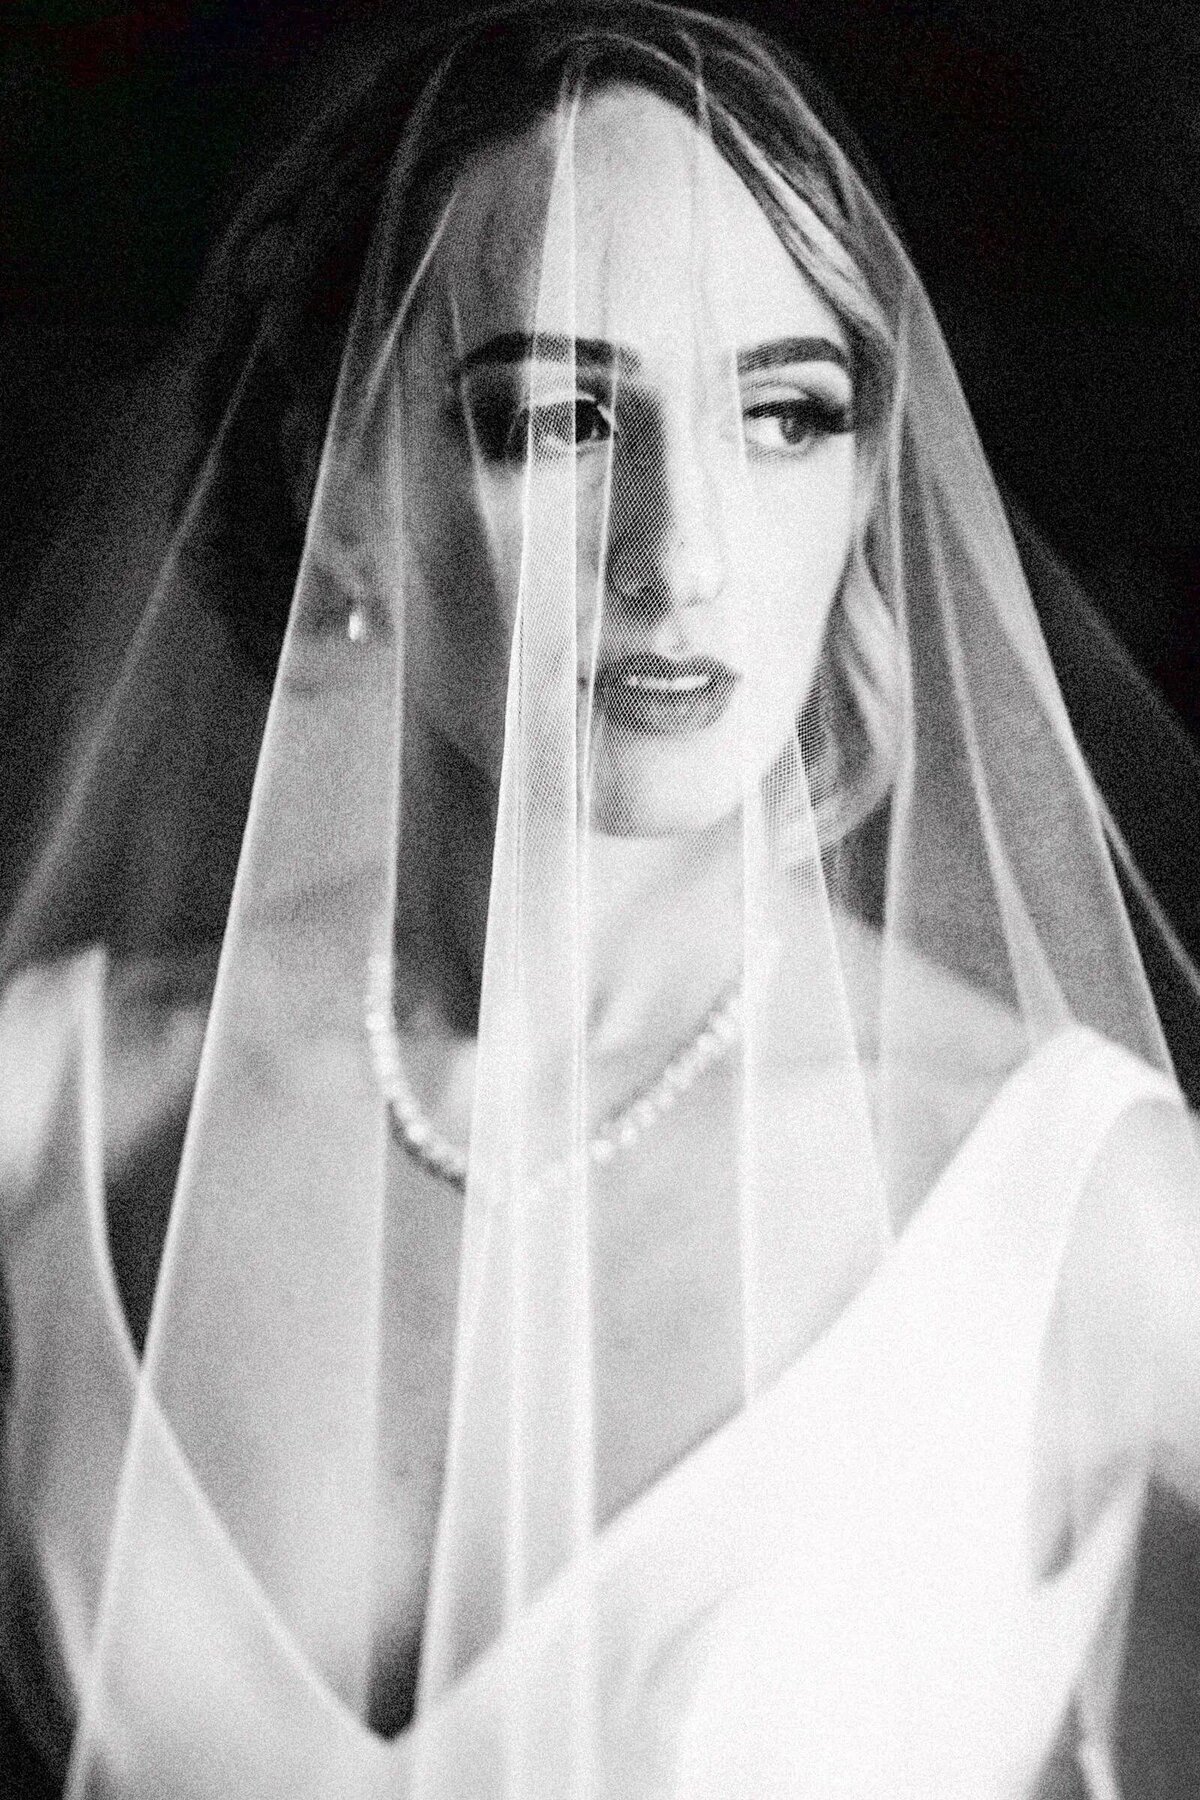 Portrait of a bride with a focused gaze through her sheer veil, highlighted in a grainy black and white photograph